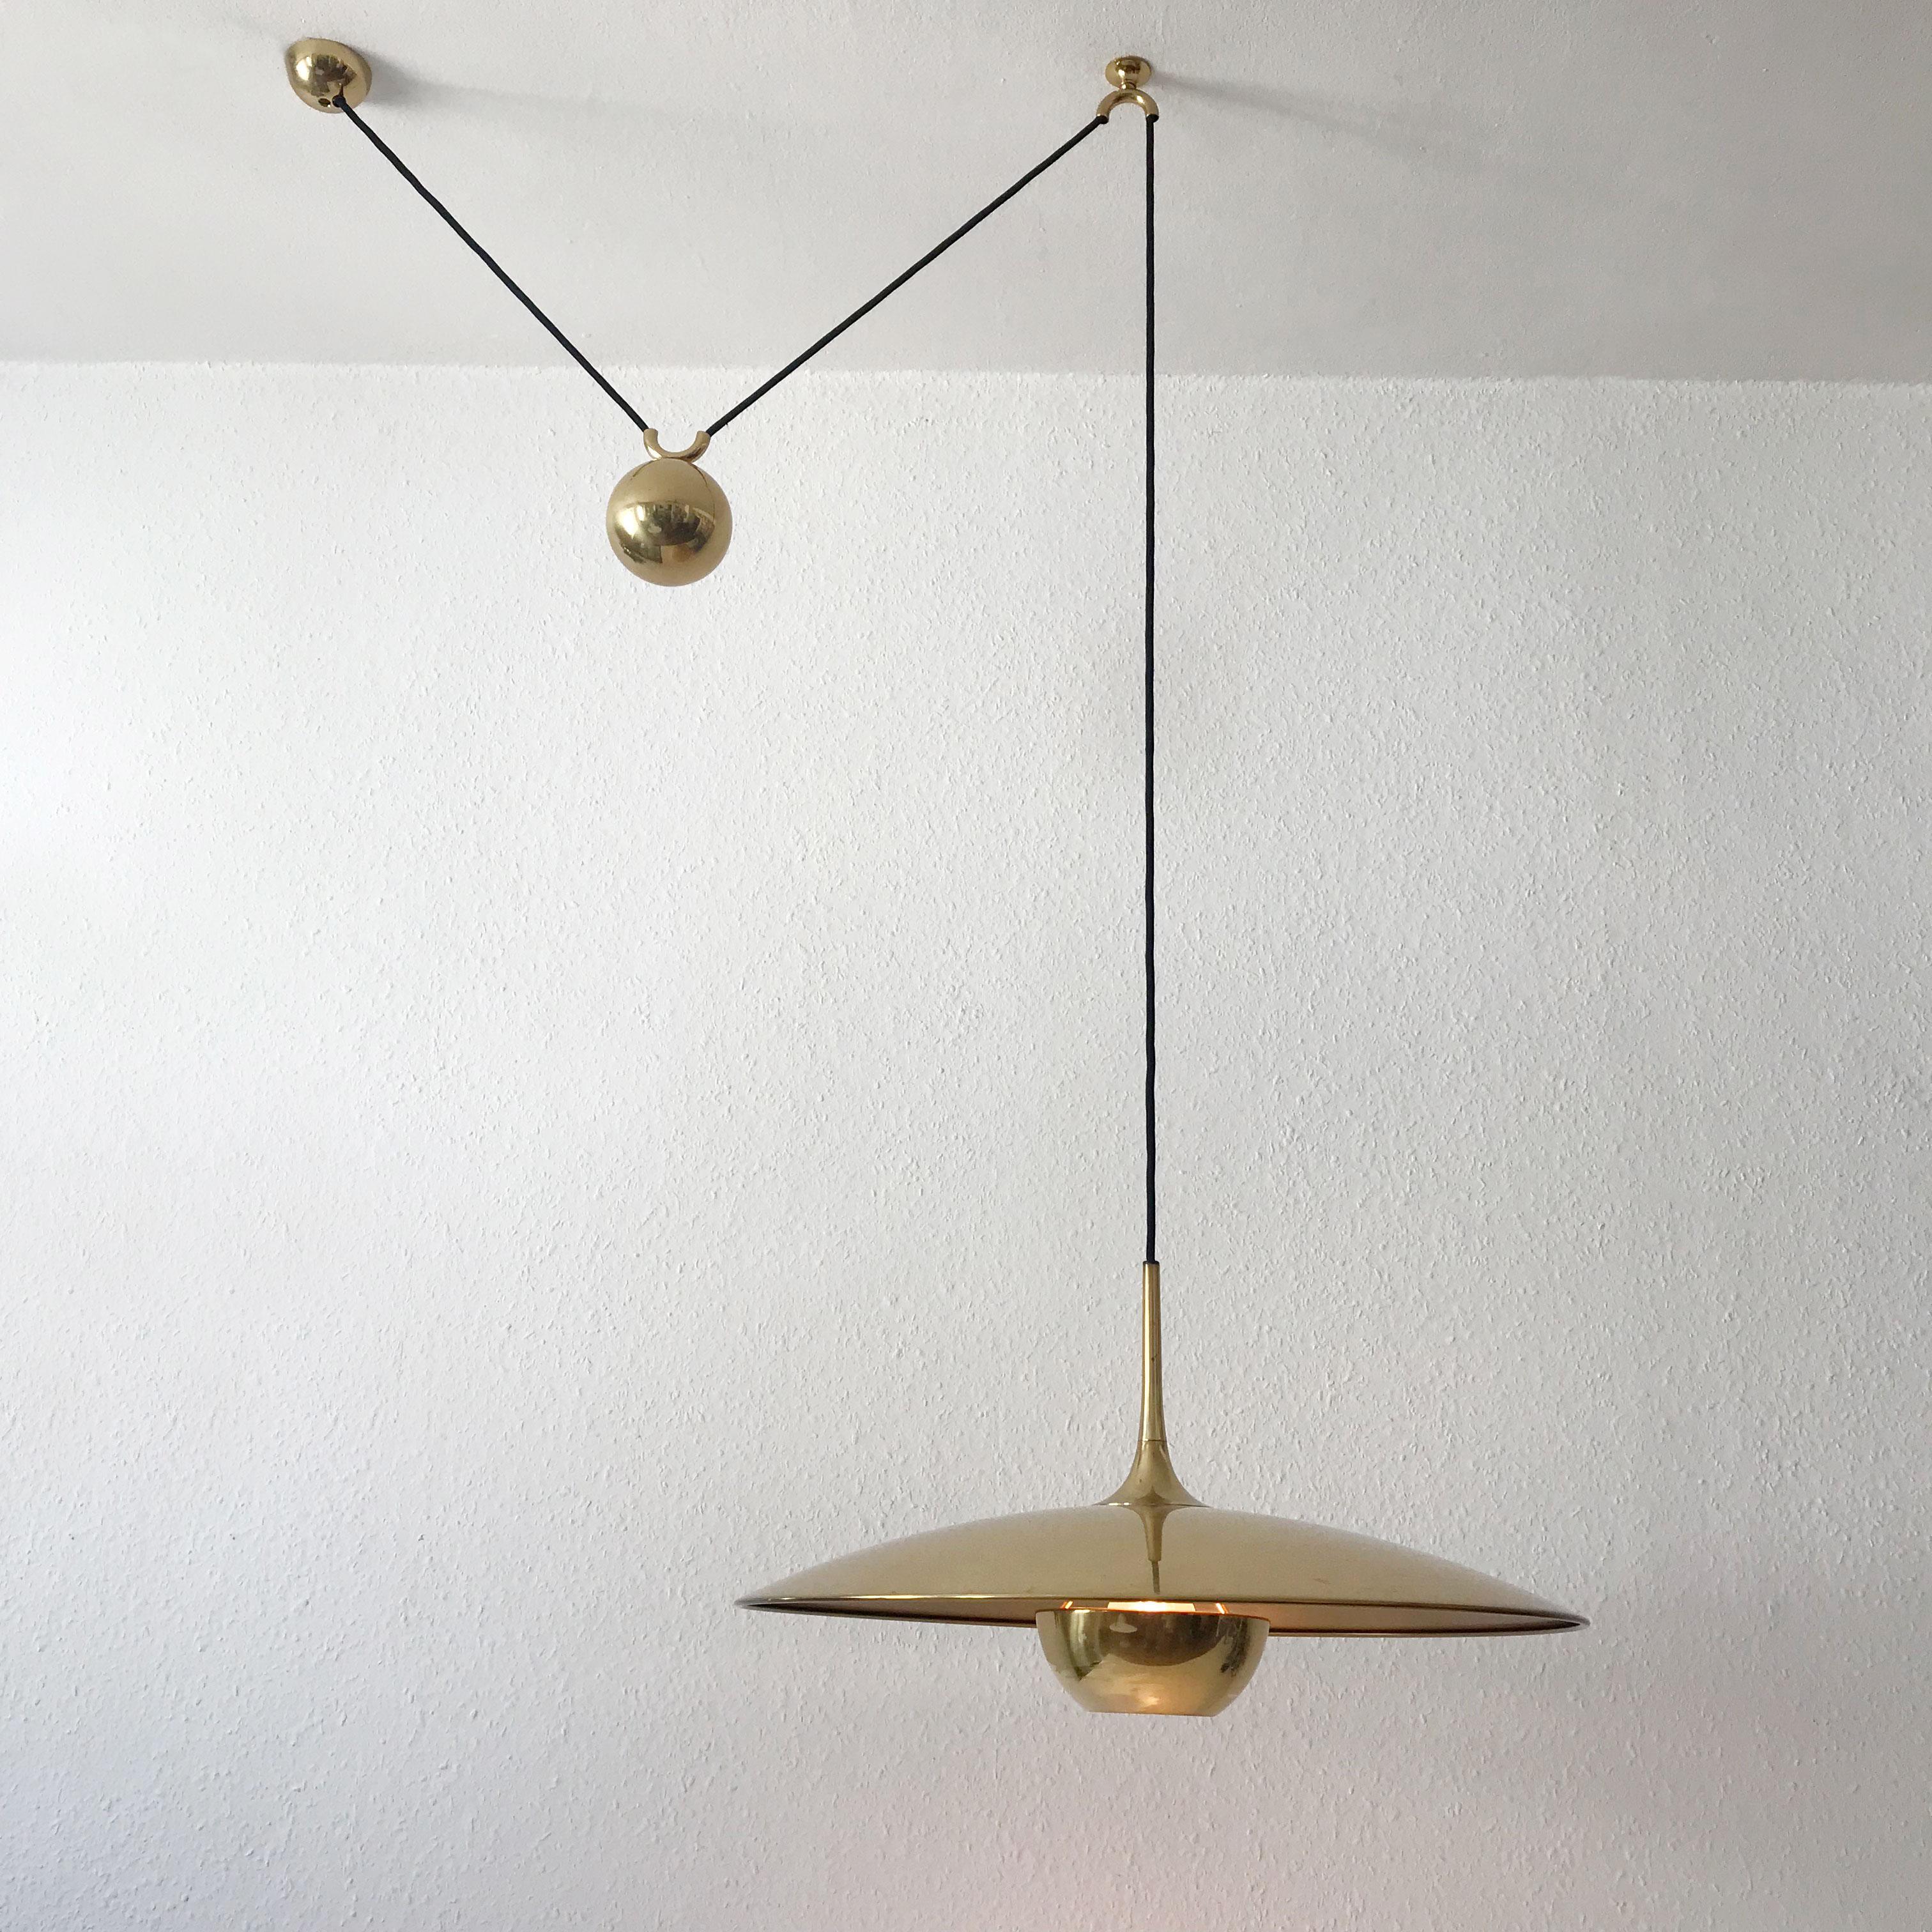 Polished Counter Balance Pendant Lamp Onos 55 by Florian Schulz, 1980s, Germany